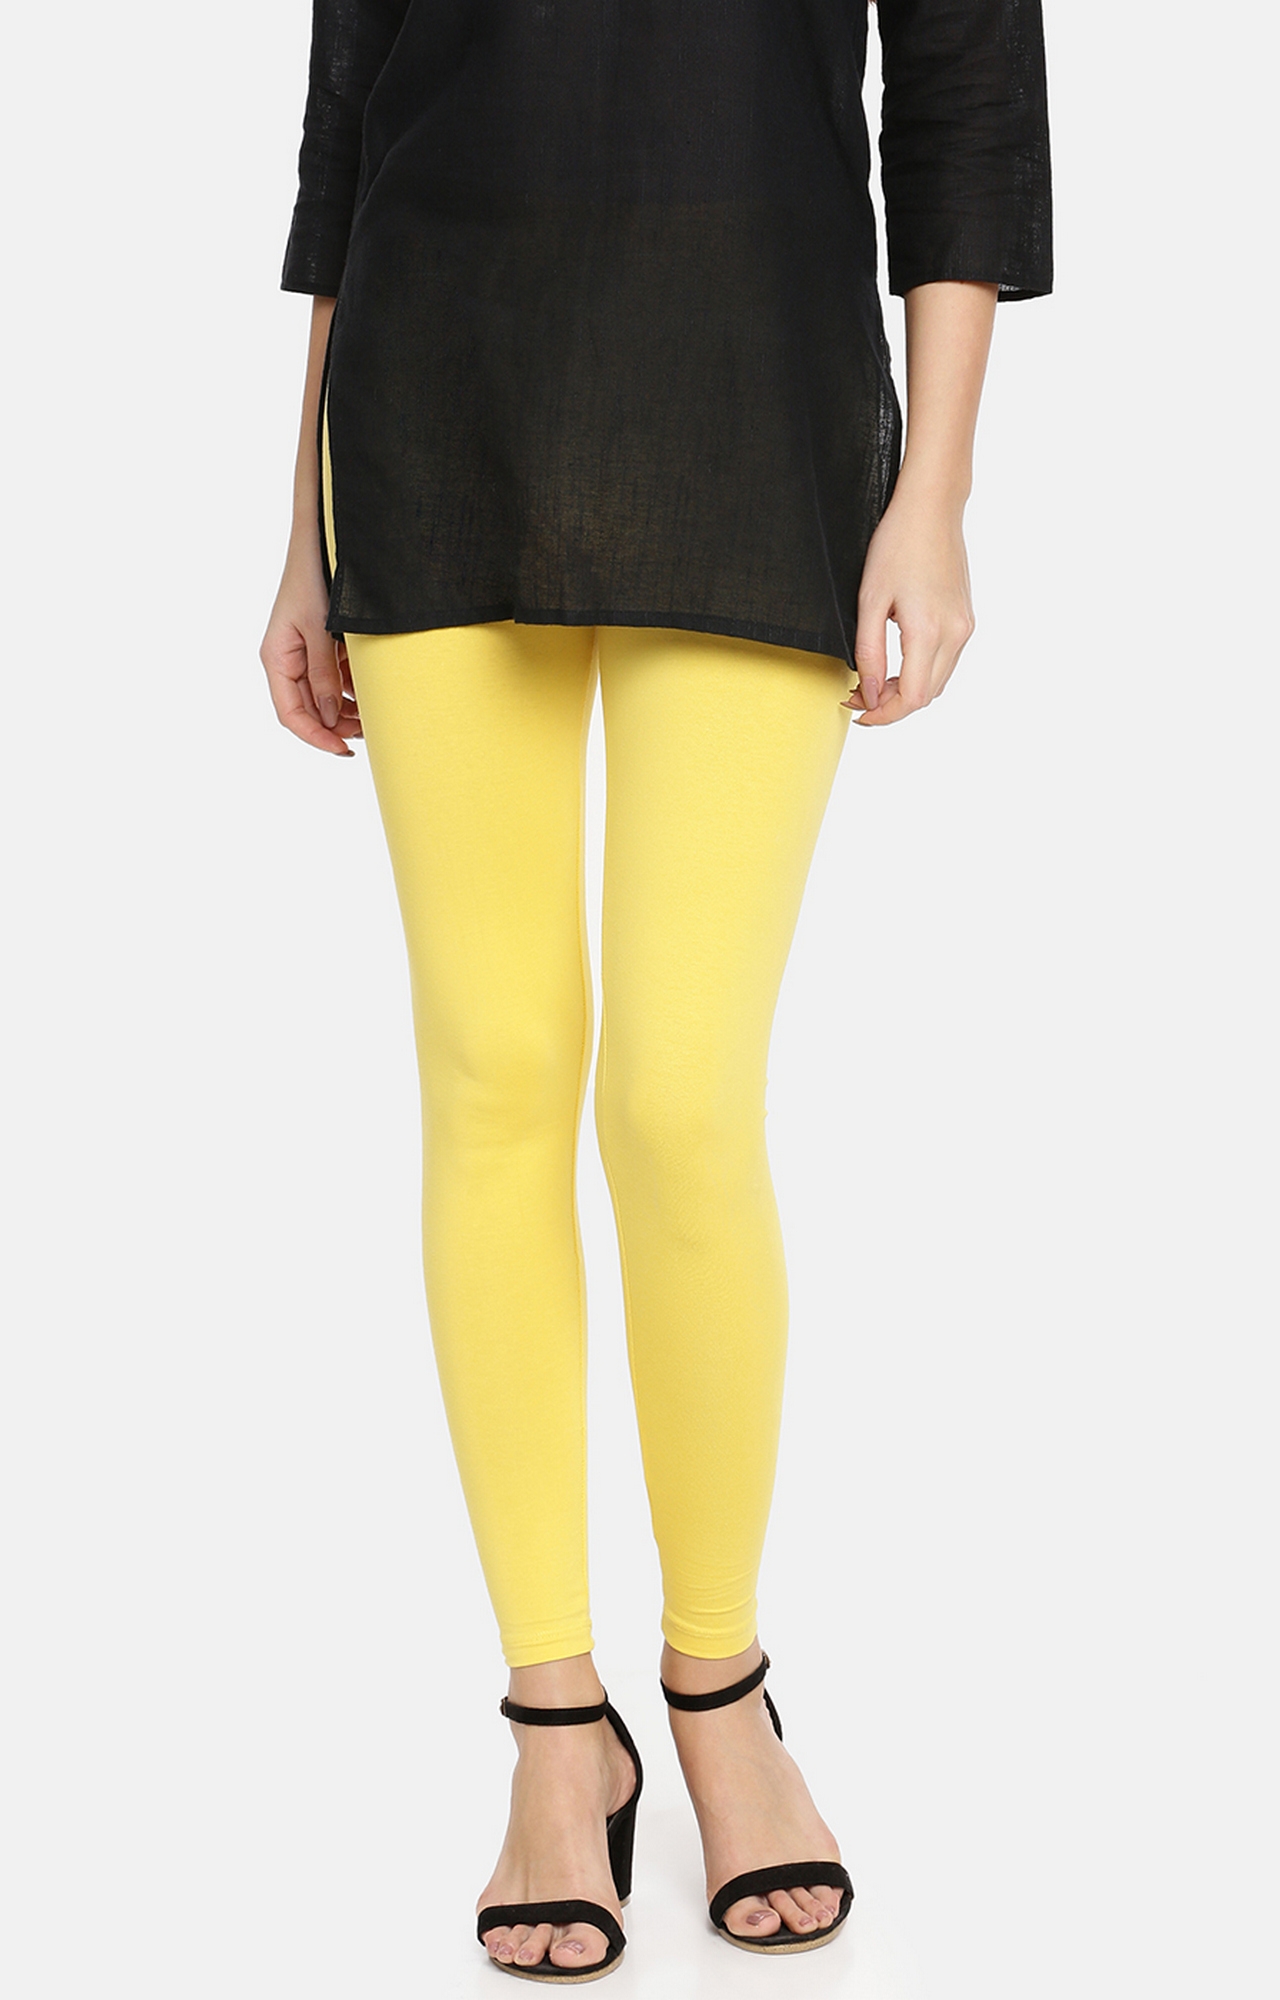 Twinbirds Busy Bee Yellow Solid Full Length Legging